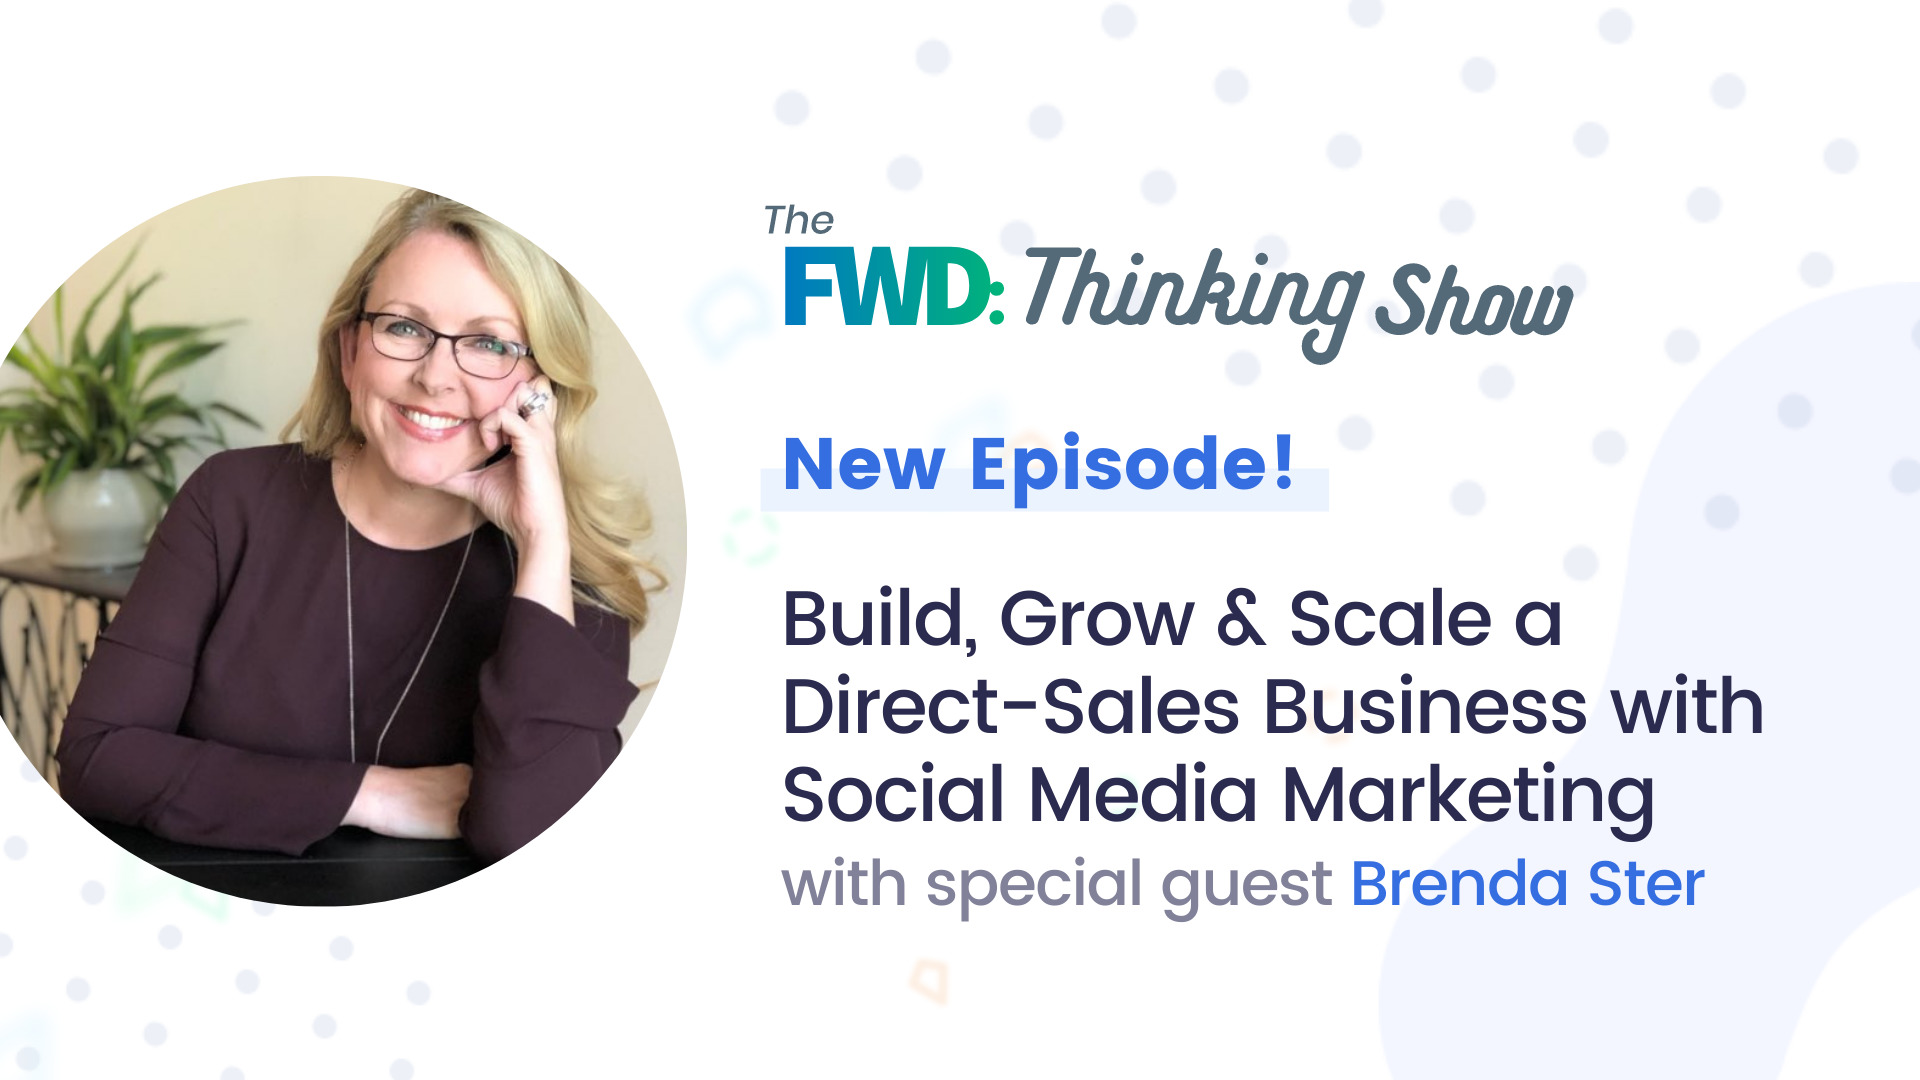 Build, Grow & Scale a Direct-Sales Business with Social Media